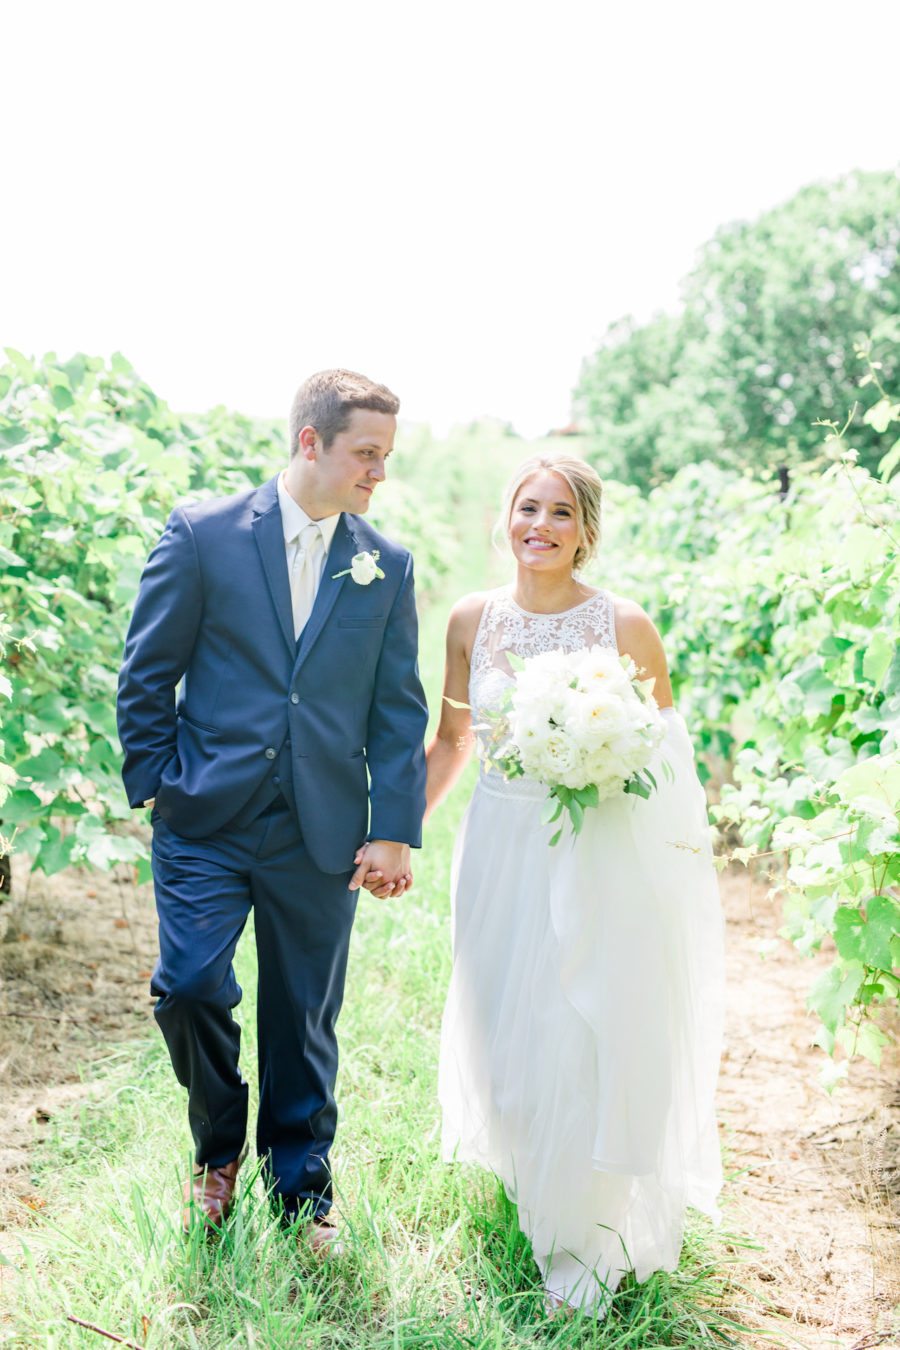 Why You Should Plan Your Wedding at Chaumette